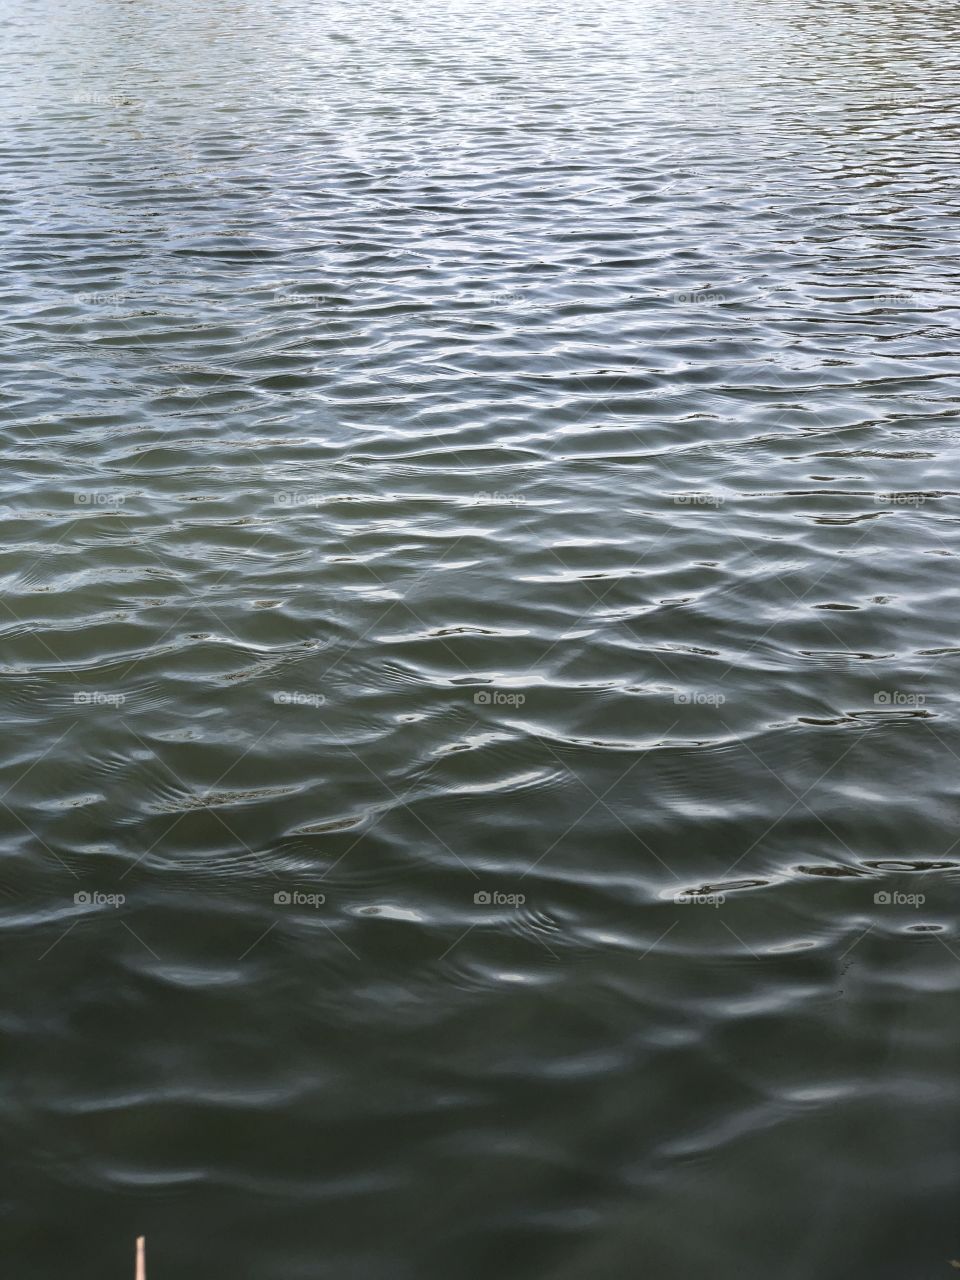 A windy day on the edge of a sandy lake making ripples on the clear water.